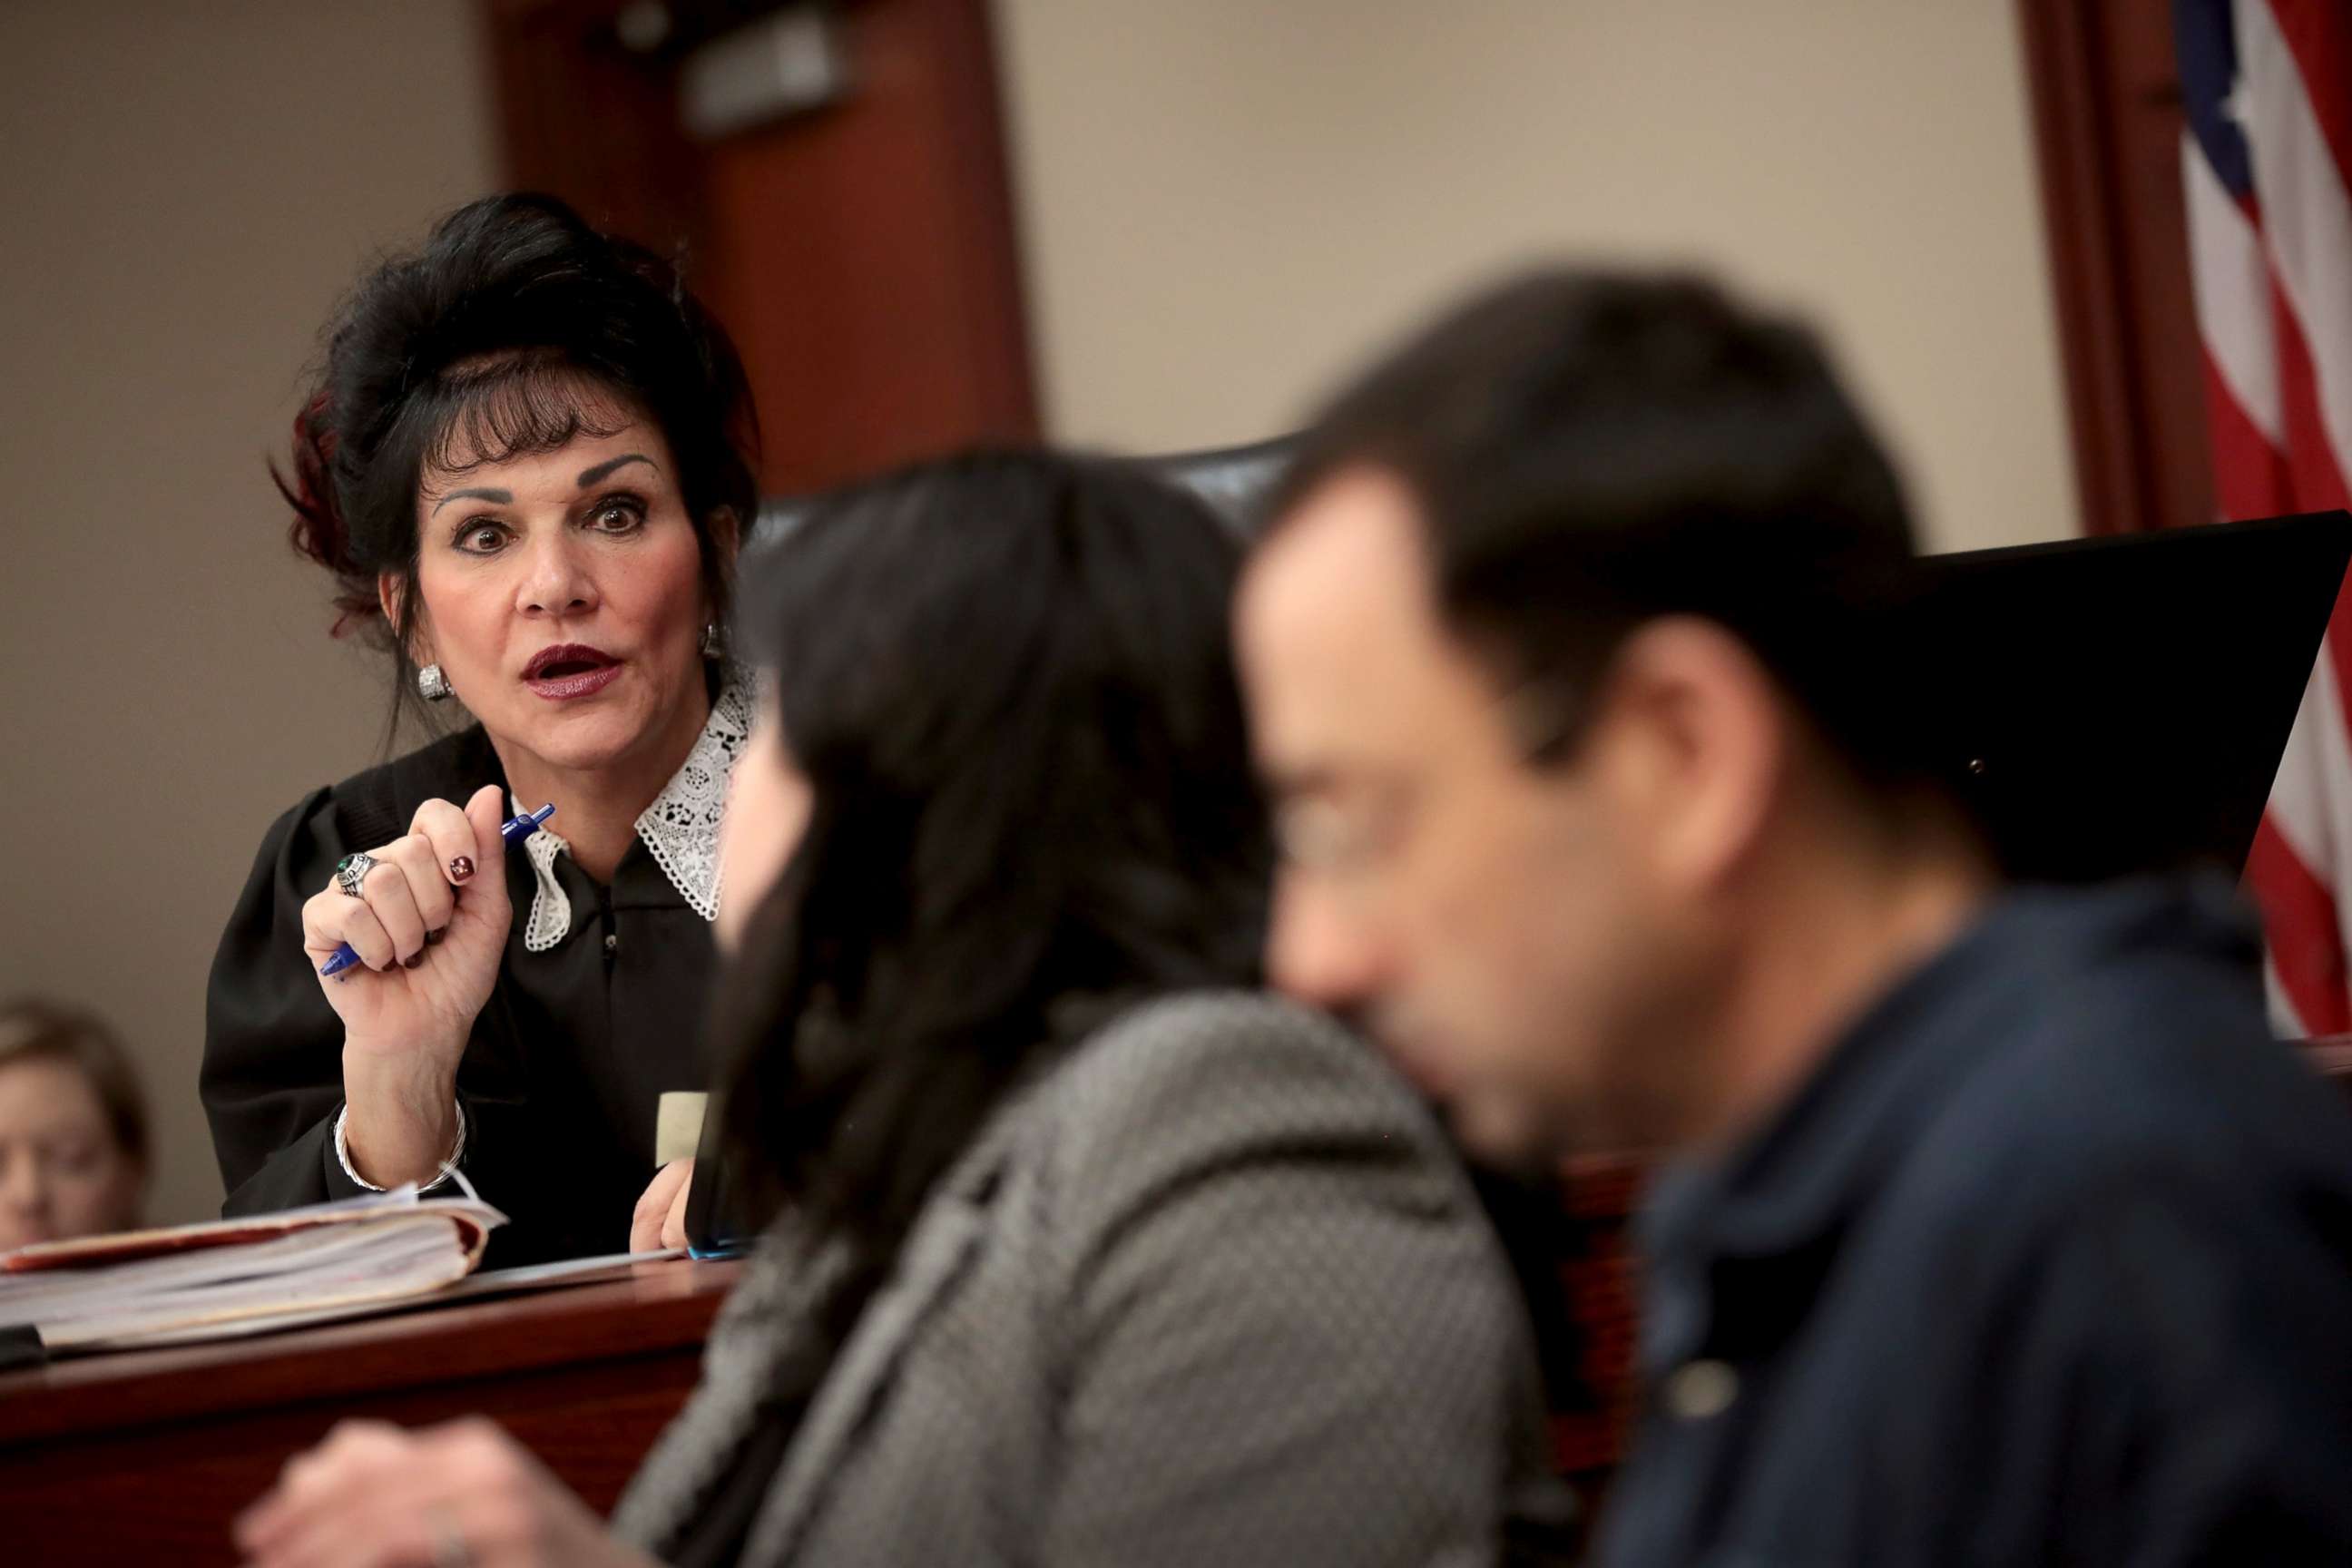 PHOTO: Judge Rosemarie Aquilina speaks with Larry Nassar, right, and his attorney Shannon Smith as he appears in court, Jan. 16, 2018, in Lansing, Mich.